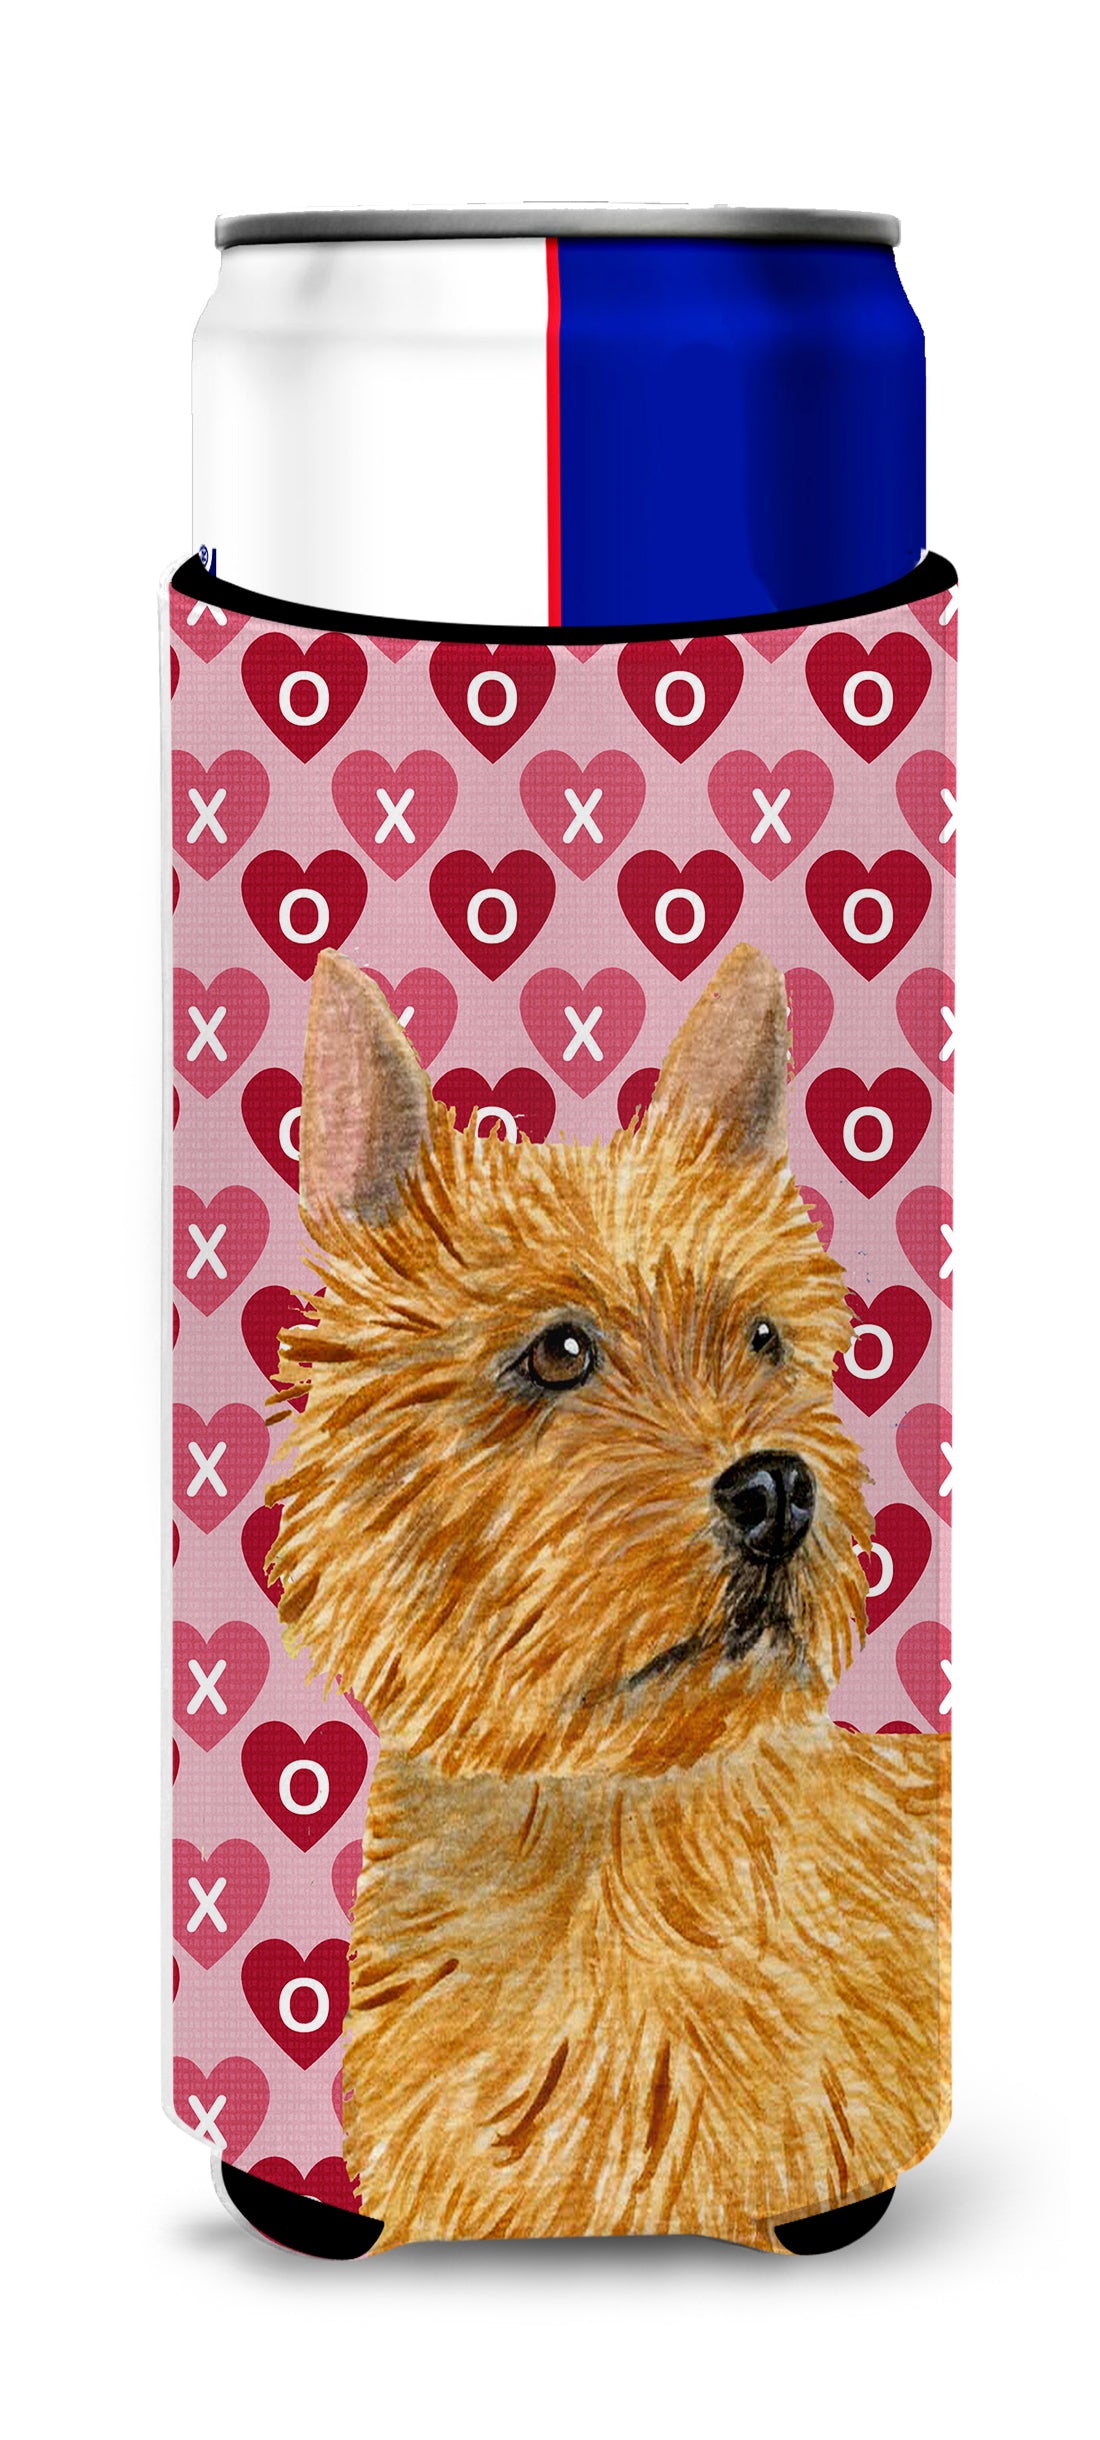 Norwich Terrier Hearts Love and Valentine's Day Portrait Ultra Beverage Insulators for slim cans SS4499MUK